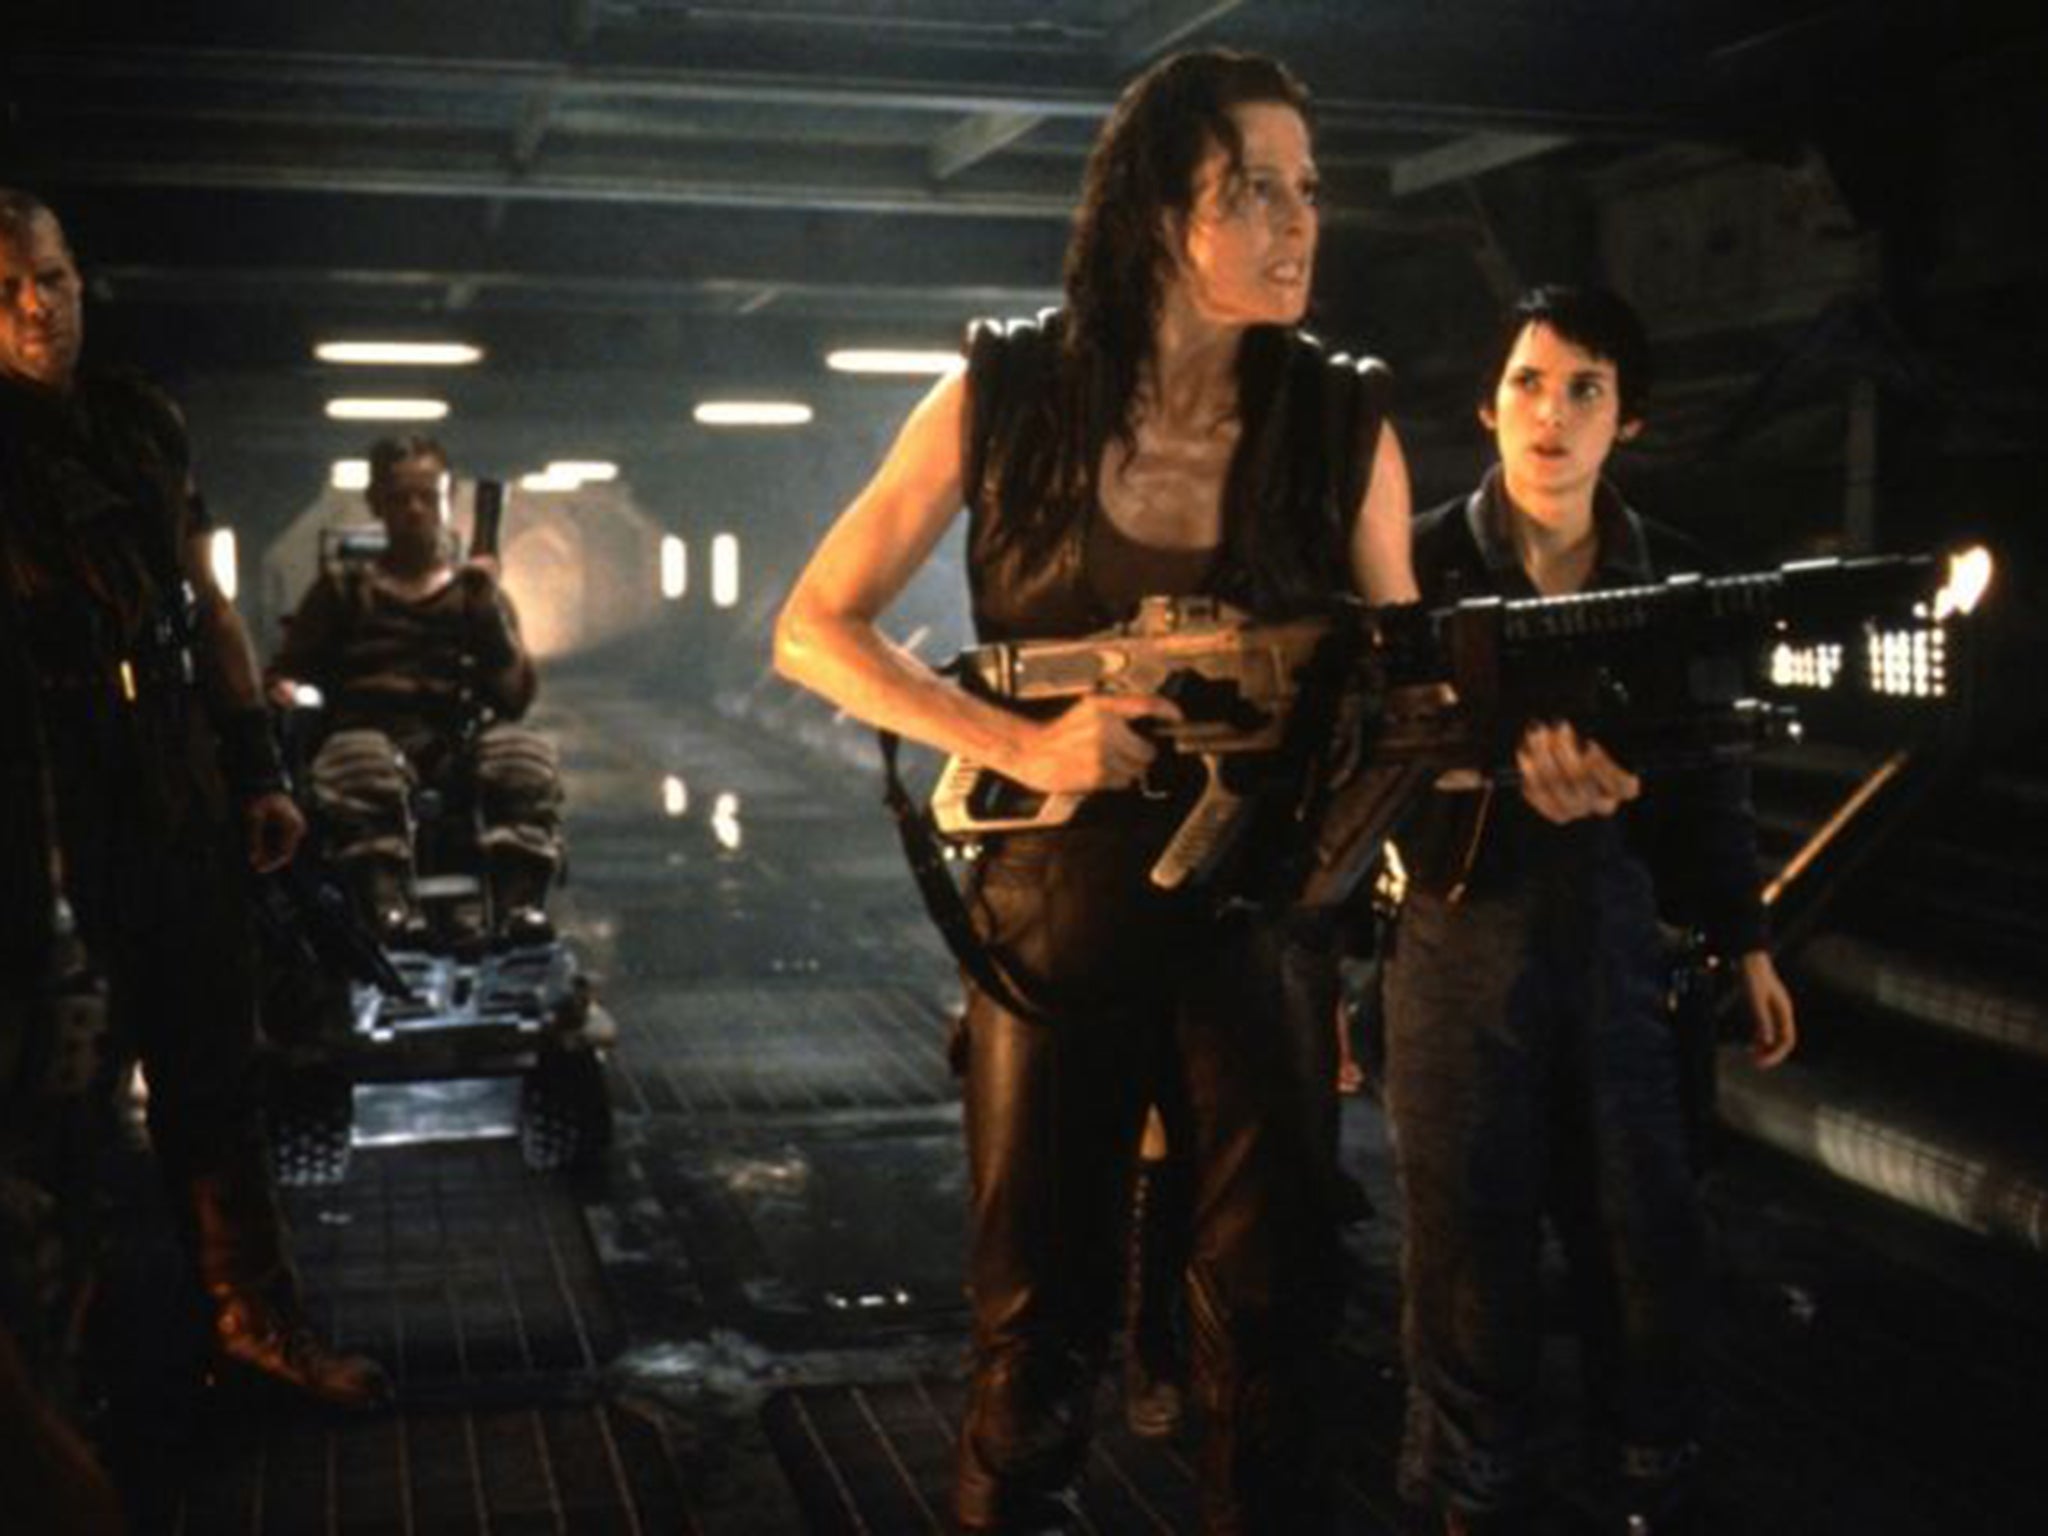 Sigourney Weaver, as Ripley, in Alien; critics have branded the naming of action movie network Movies4Men as “offensive” and “demographic box-ticking gone mad”.